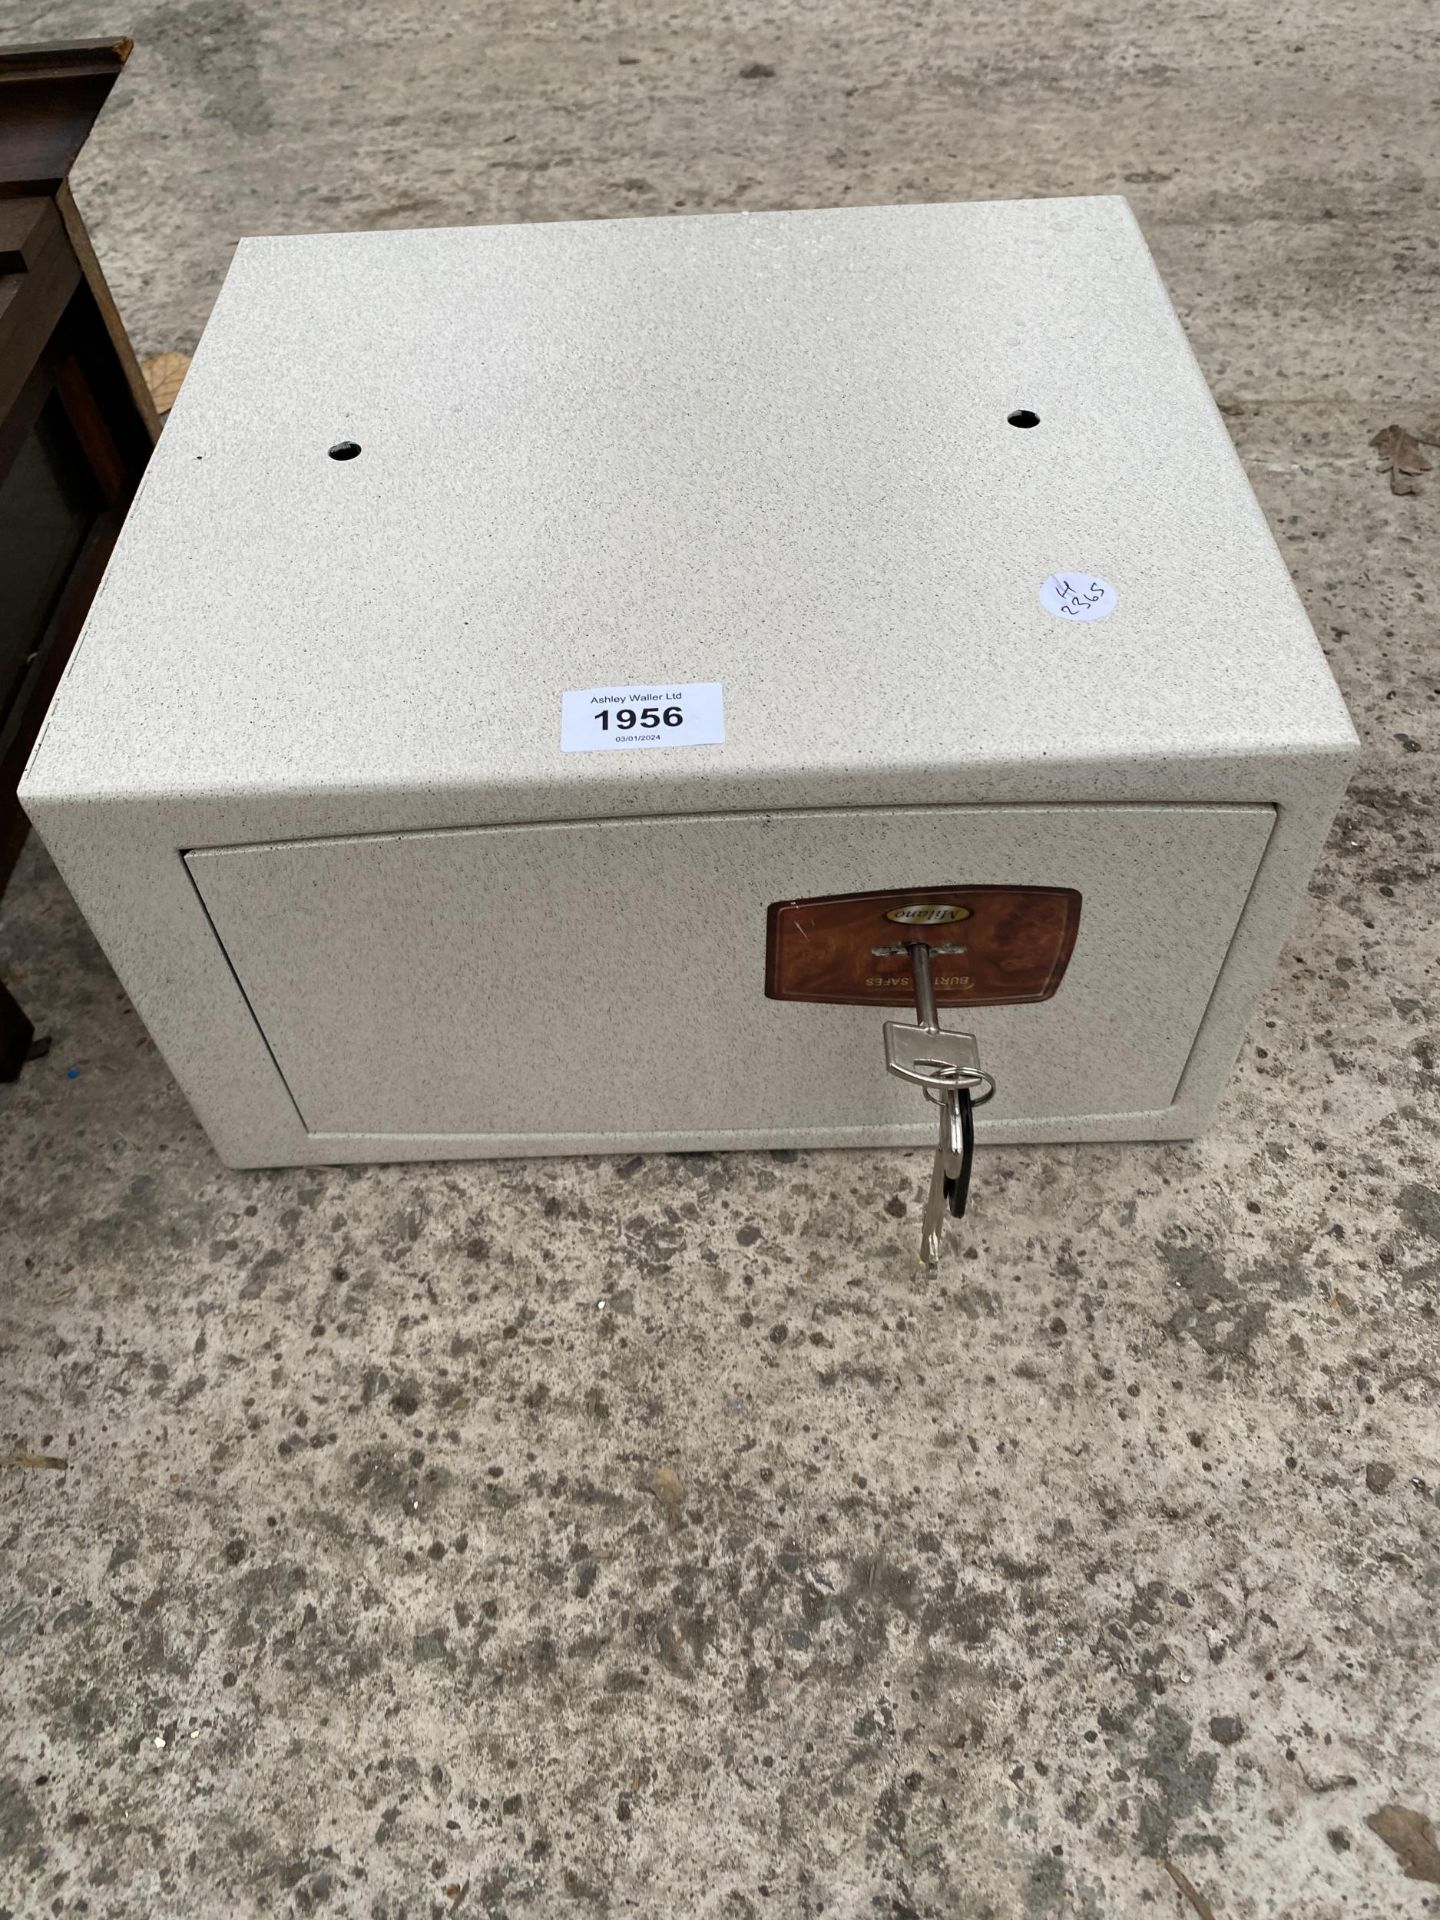 A SMALL METAL SAFE COMPLETE WITH KEY